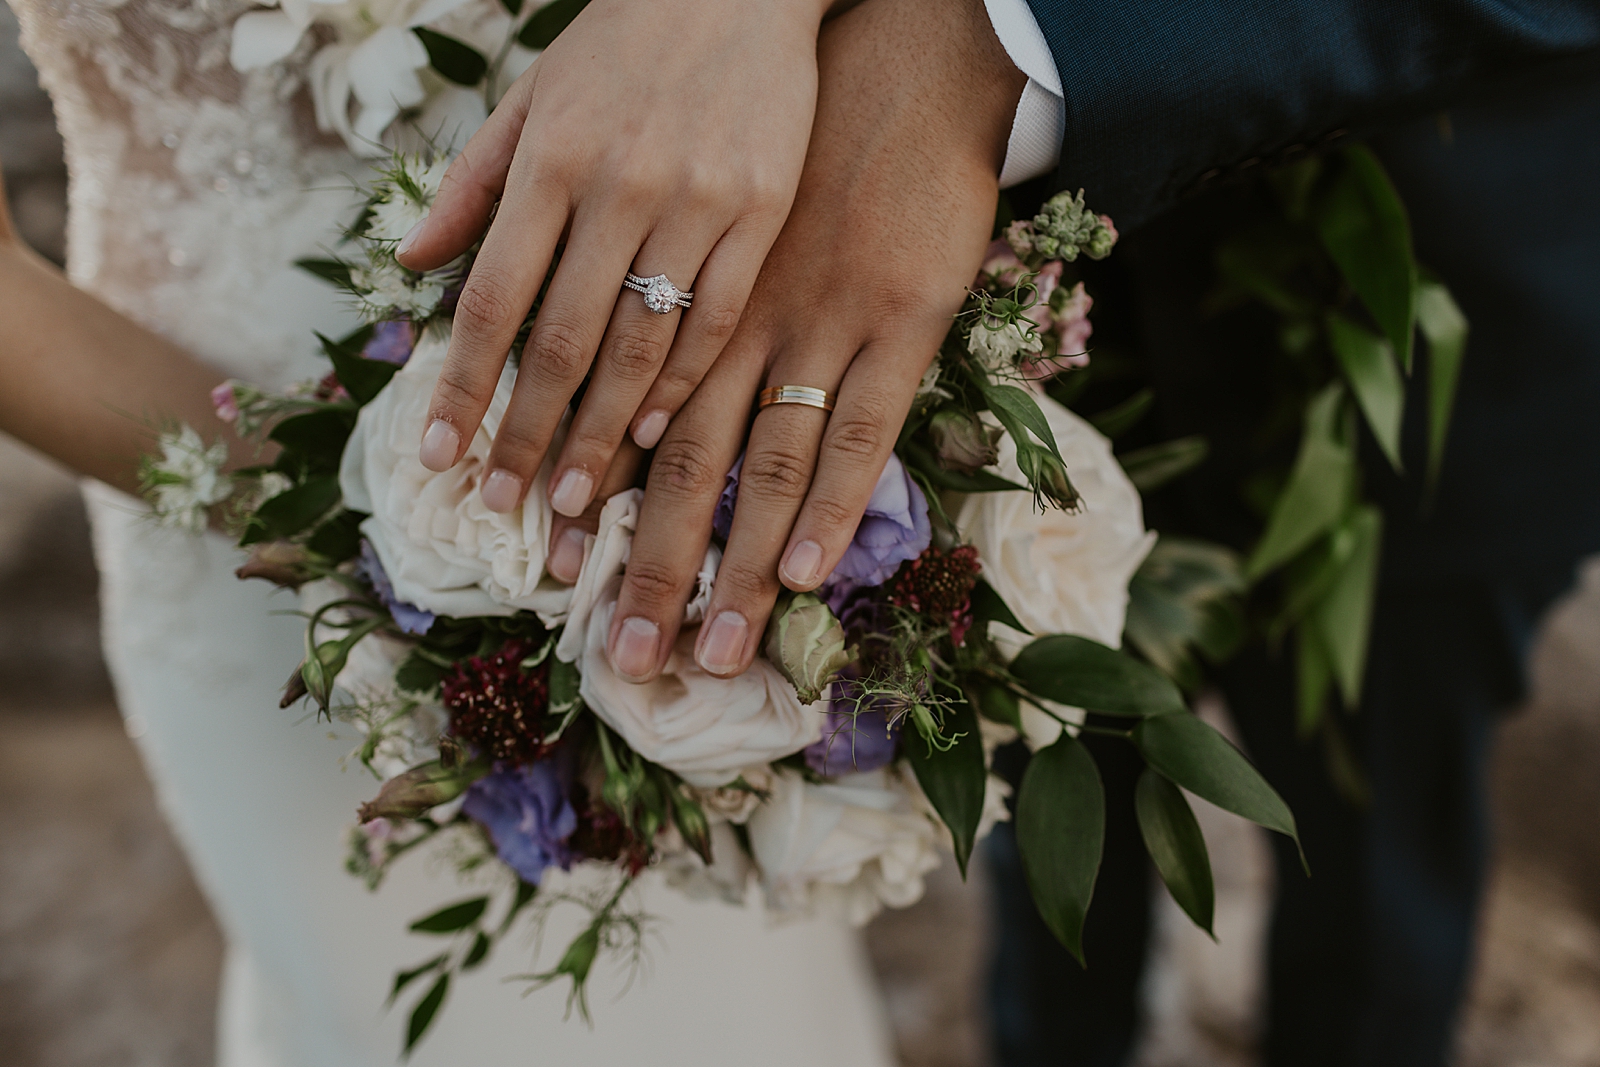 Closeup of Bride and Groom's hands with wedding bands